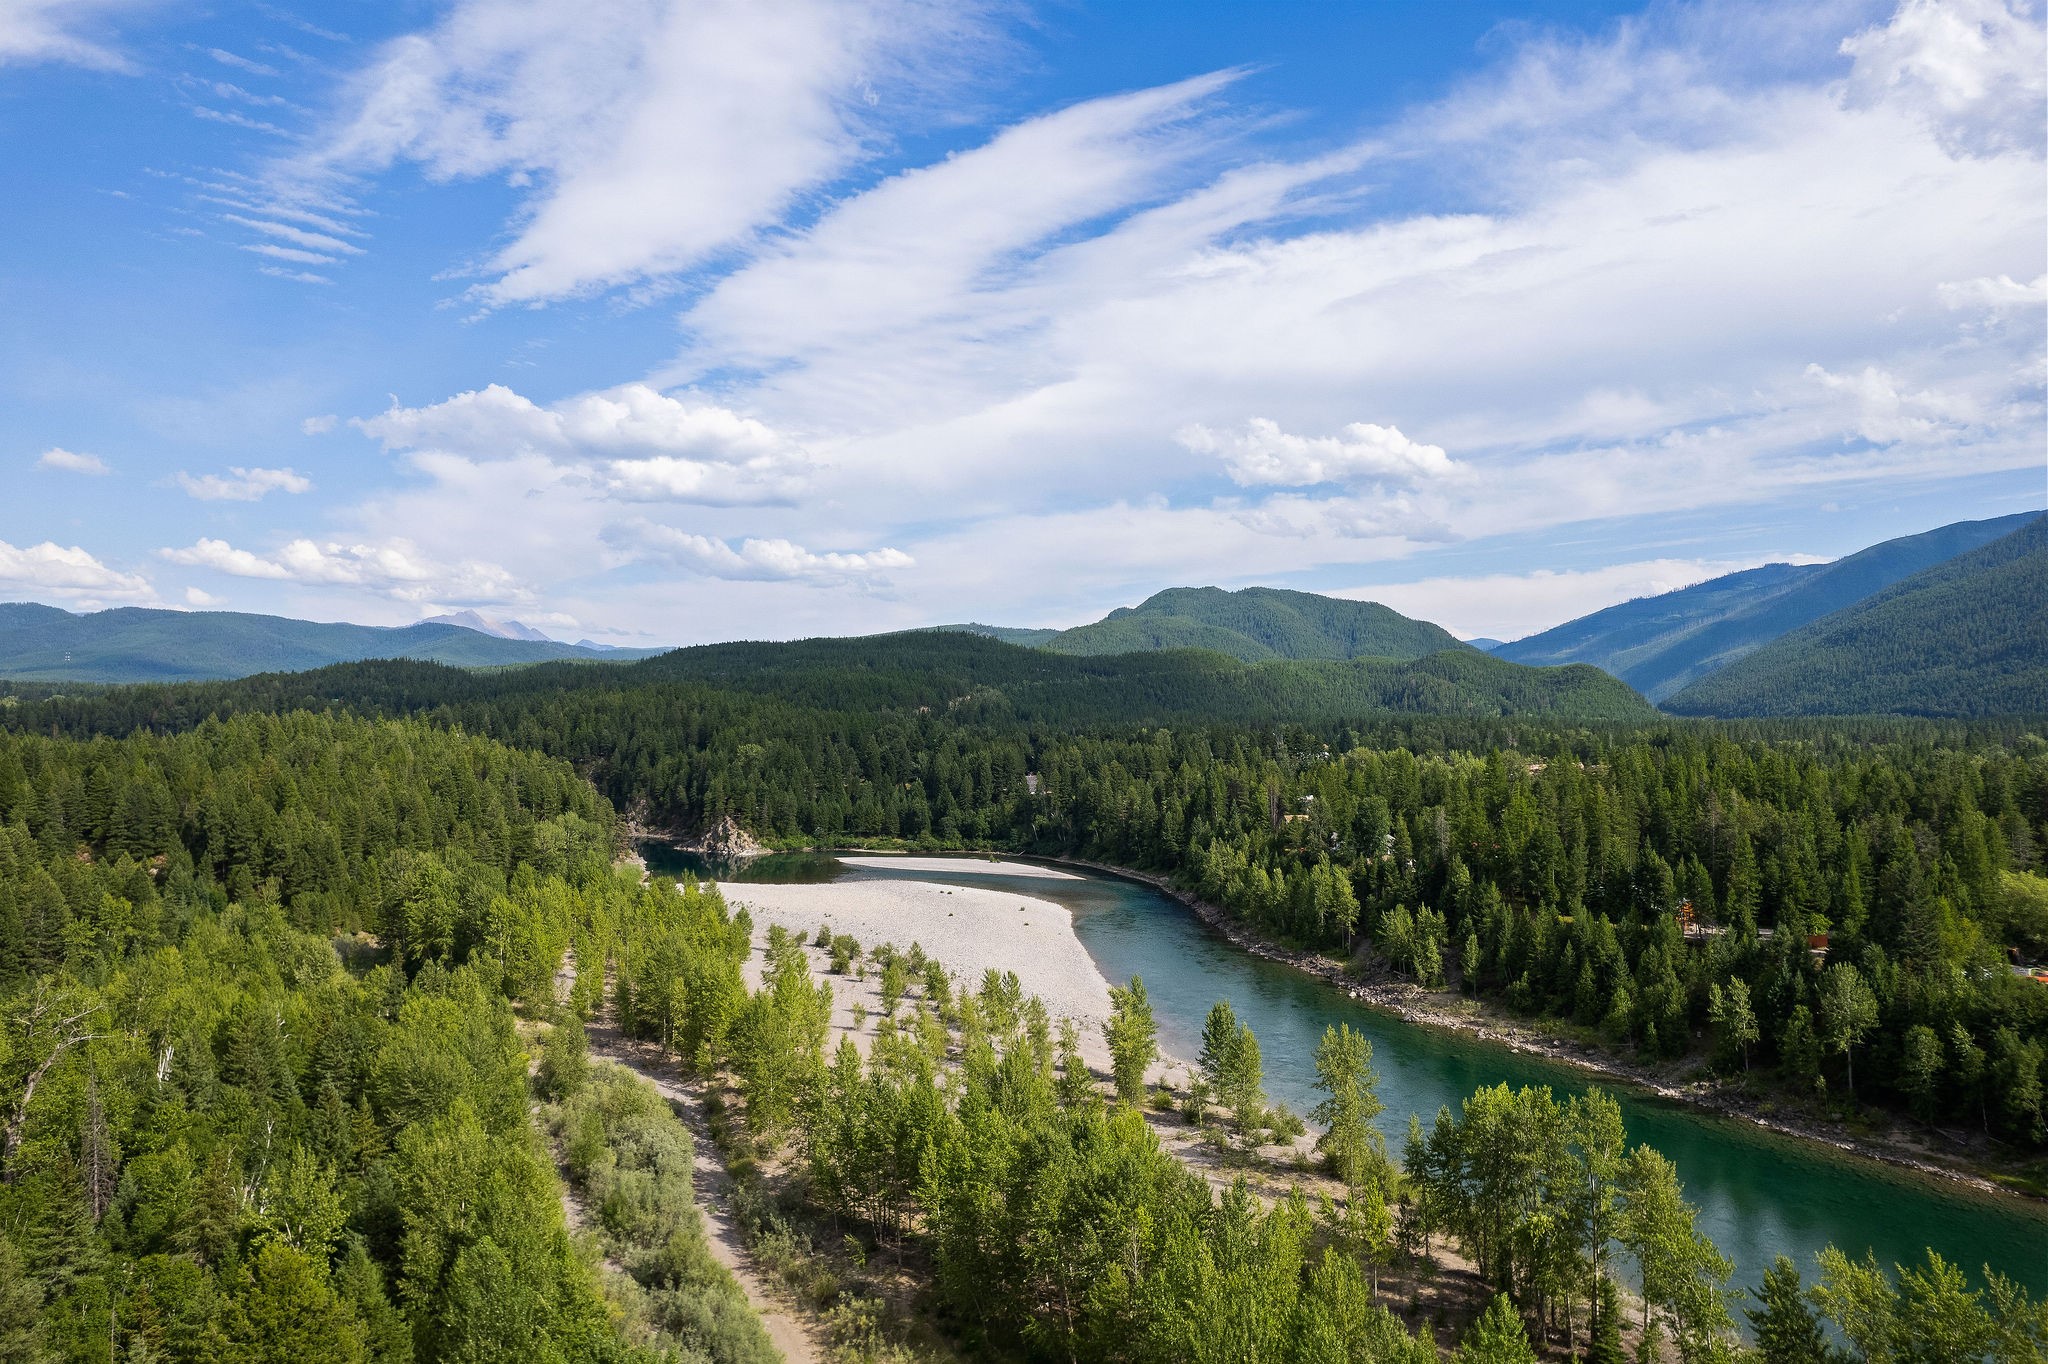 Once-in-a-lifetime opportunity to own 26.88 acres of pristine landscape with just under 820' of Flathead River frontage! Glacier National Park is minutes away! Soak in absolutely spectacular vistas of the surrounding mountain landscapes - the perfect backdrop for a Montana getaway. A beautiful building bench awaits your wildest creative endeavors. This parcel not only boasts privacy and seclusion in nature's finest, but also presents a multitude of amenities in the gated community, including a shooting range, community campfire, helipad, grill/picnic area, trails for hiking/riding, and Flathead River access for world-class fly fishing and rafting! This property is in a prime location to enjoy year-round recreational adventures, from snowmobiling, to hiking, camping, and more! Call Jennifer Shelley at 406.249.8929, Nathan May at 406.300.2689 or your real estate professional.